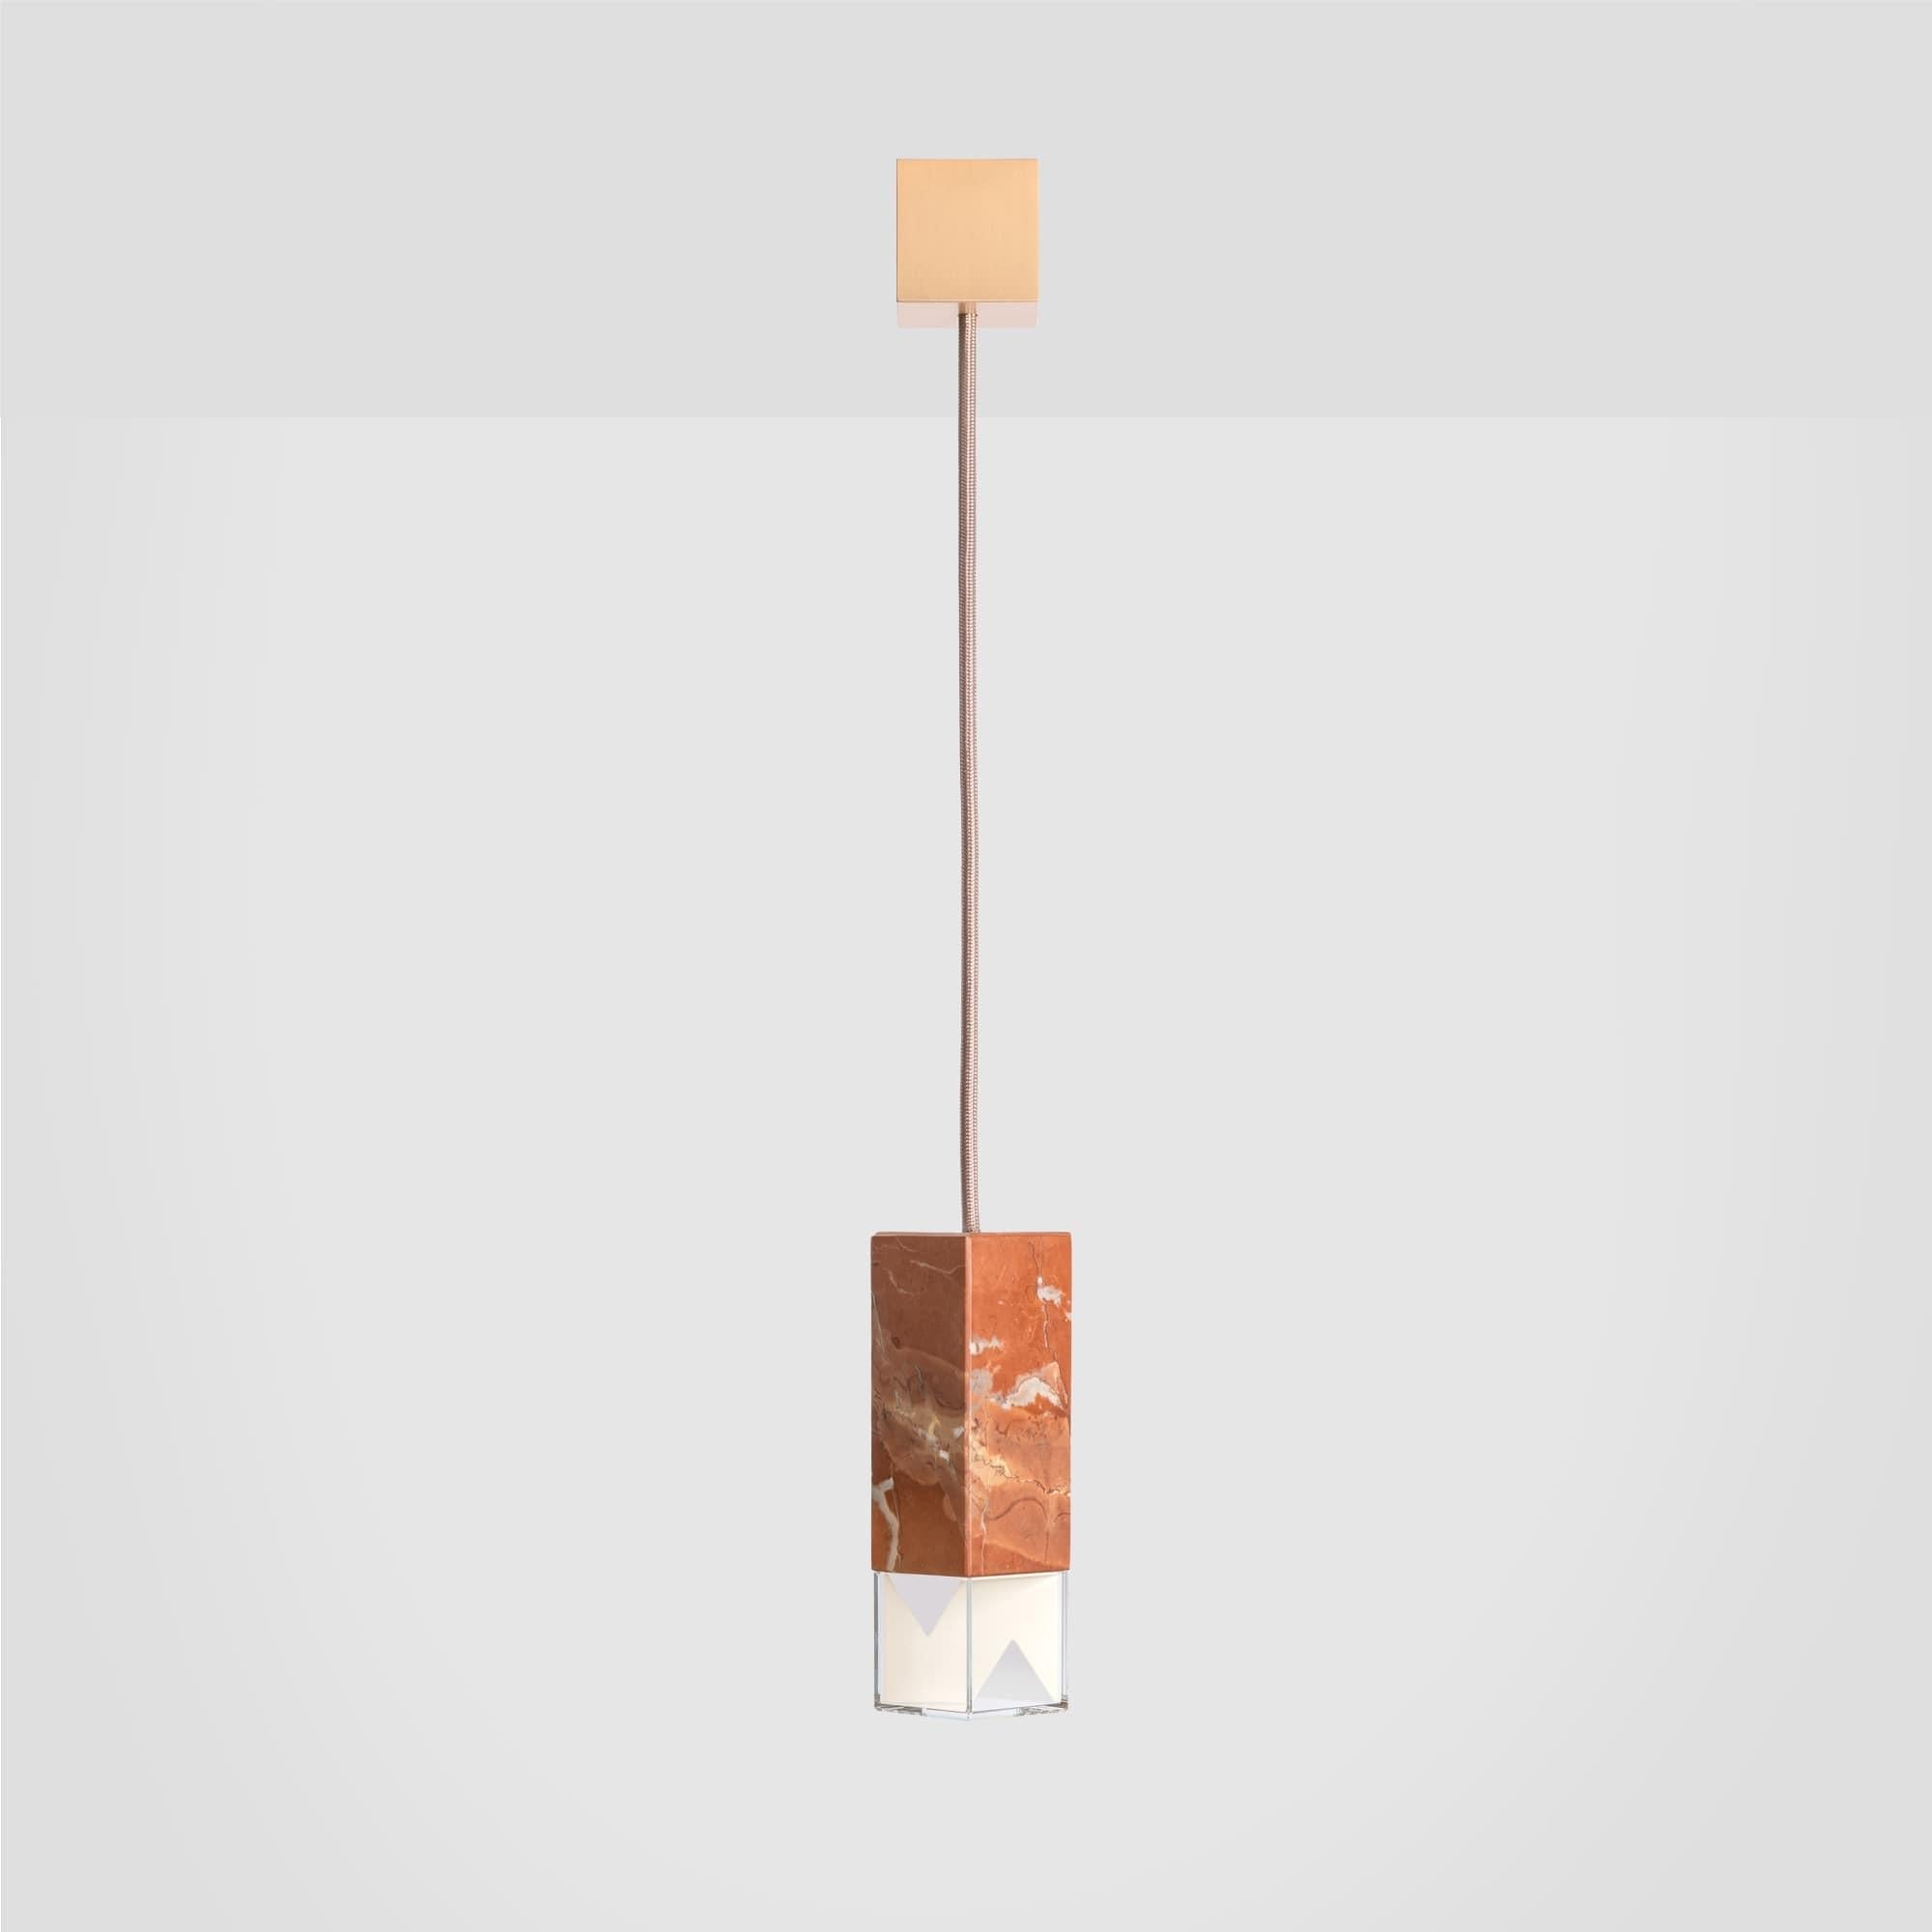 Lamp one color Edition by Formaminima
Dimensions: 5 x 5 x H 17 cm
Materials: Lamp body in Marble Rosso Collemandina
Ultra- thin anti-reflection crystal diffuser
Inside- diffuser Limoges biscuit-finish porcelain sheets

Satin brass ceiling rose